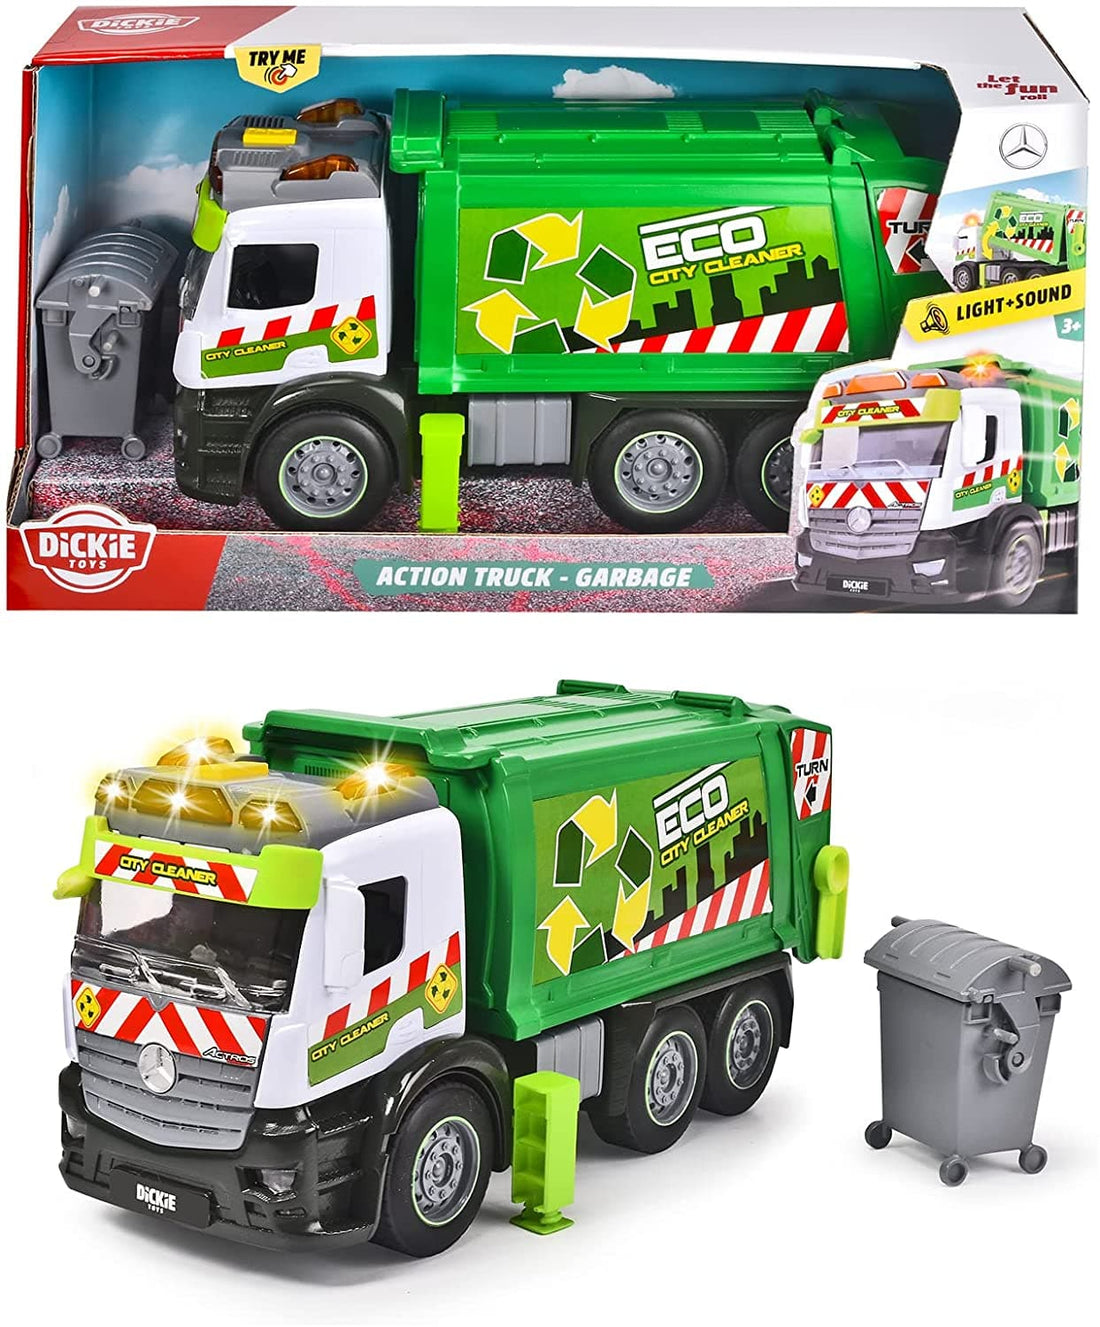 Mercedes Action Truck Waste Truck Cm. 26 With Lights And Sounds